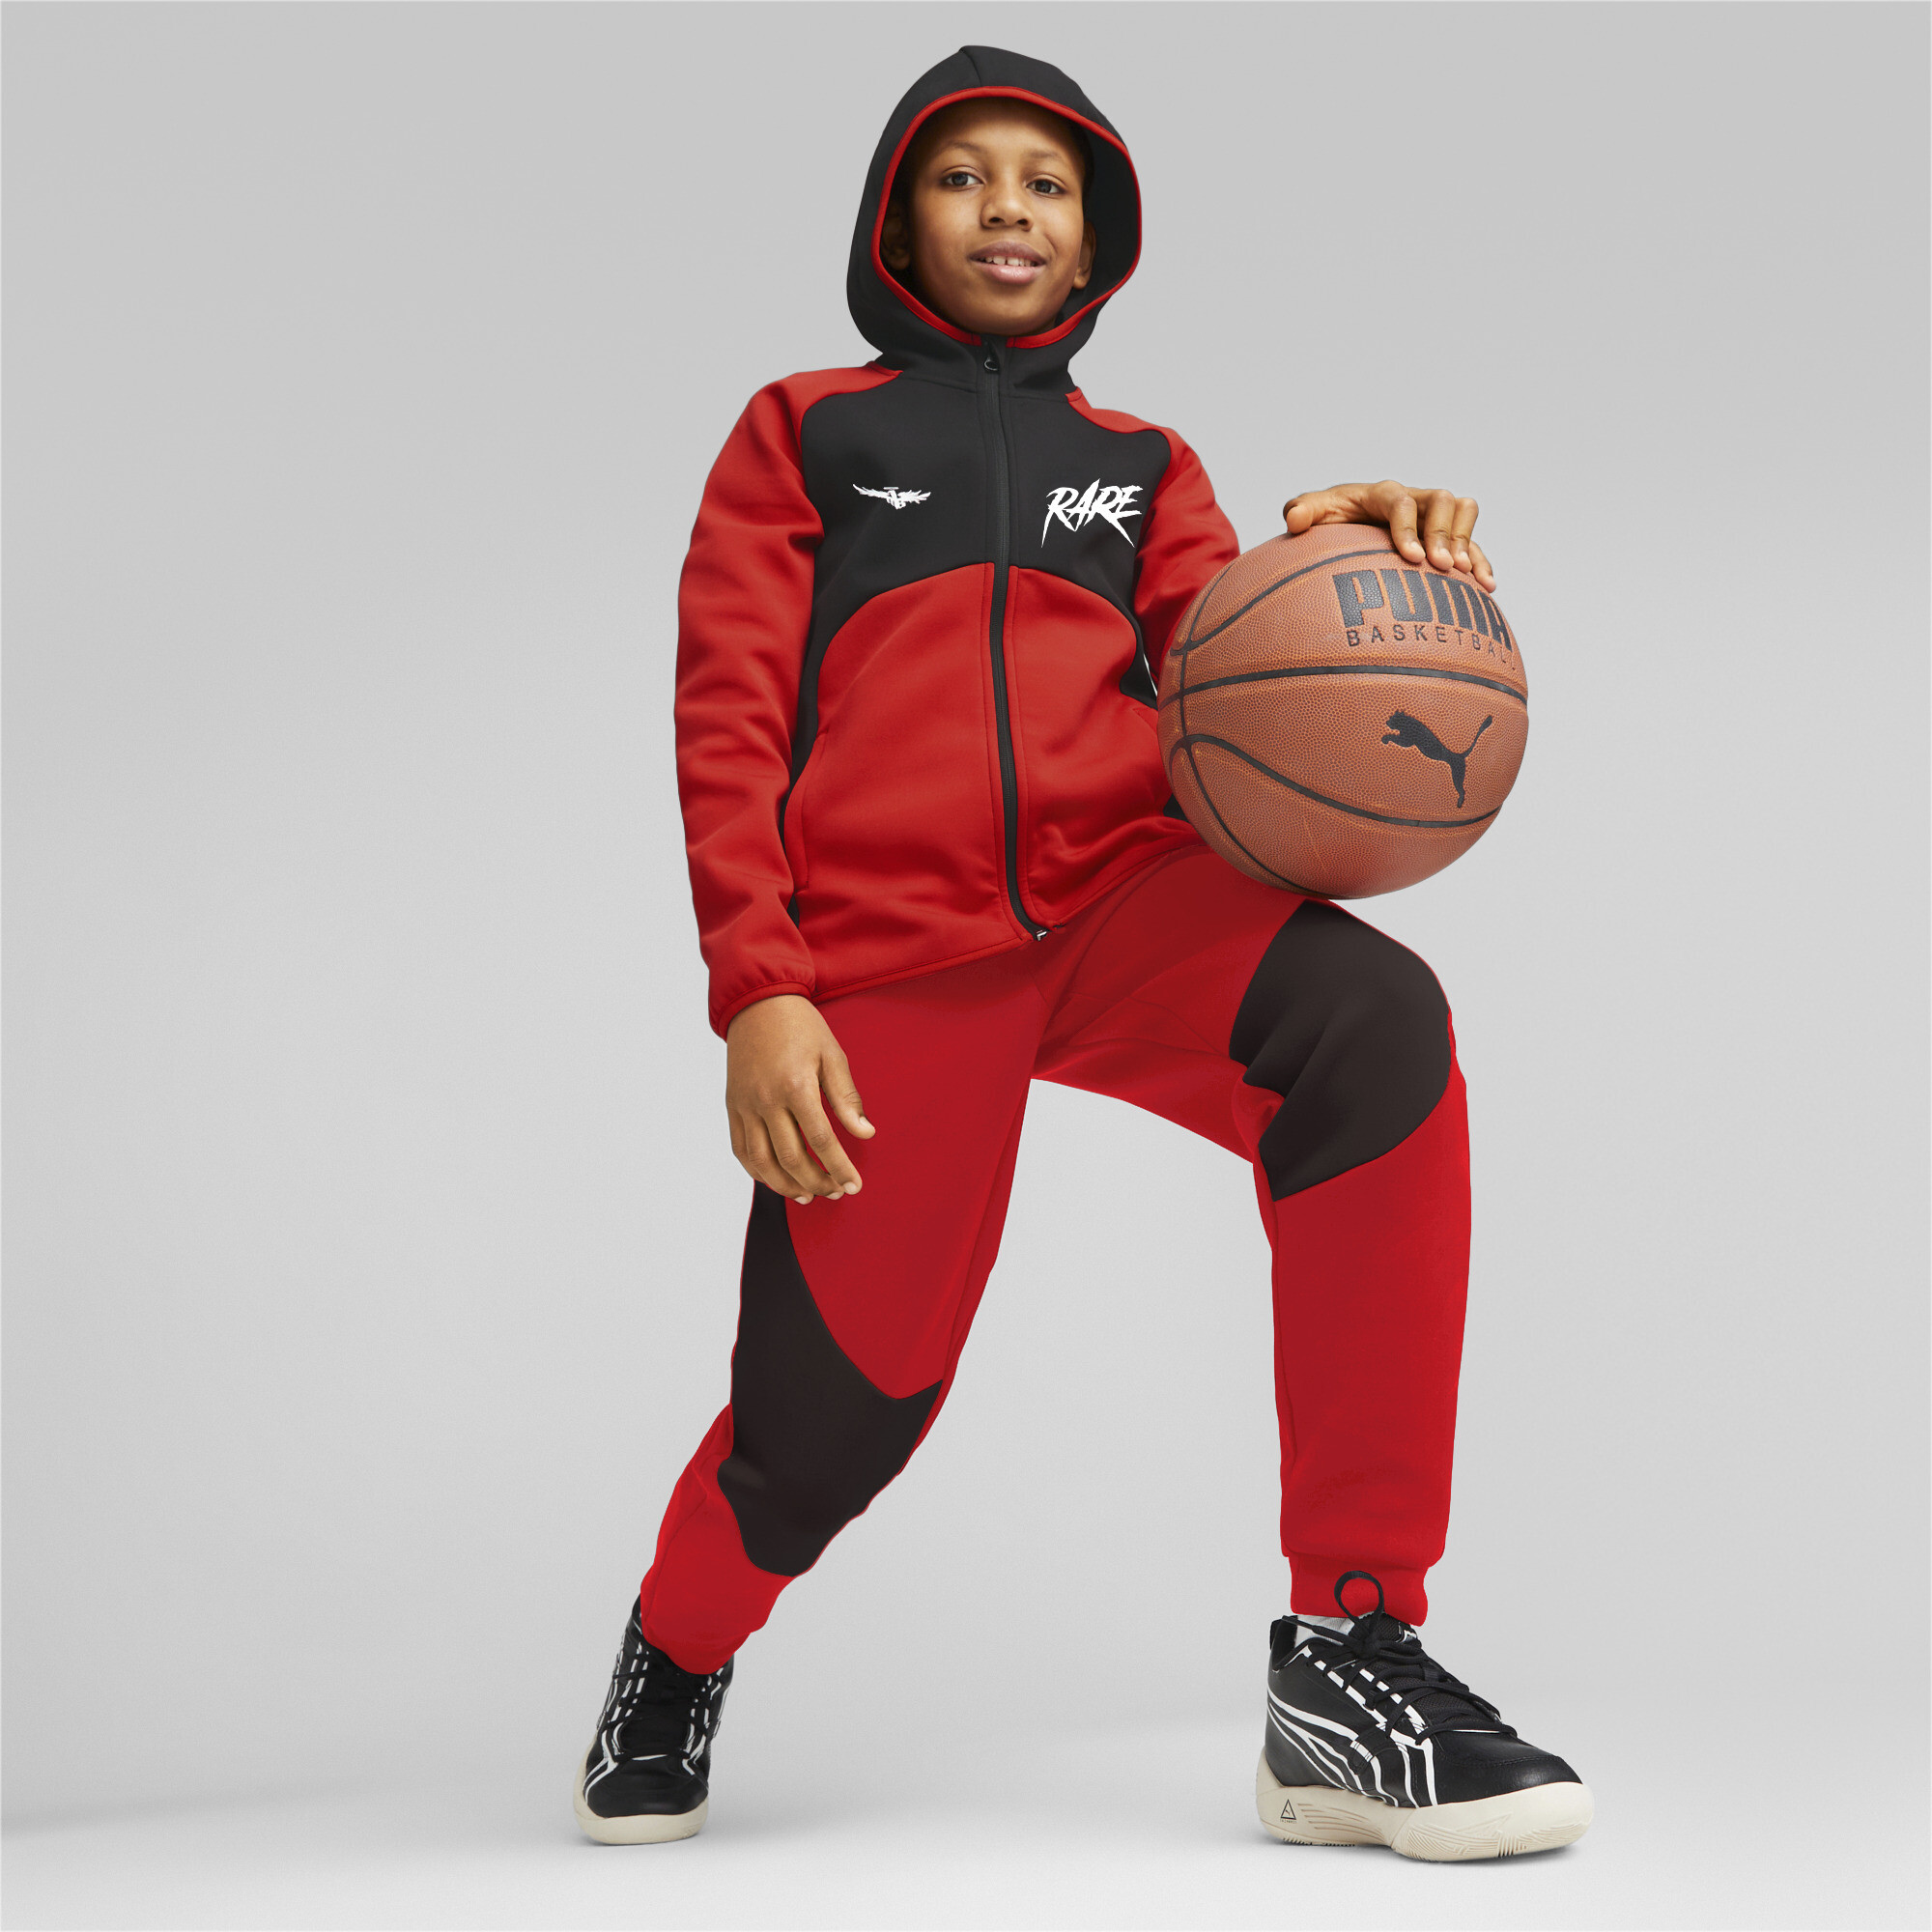 PUMA X MELO Dime Jacket In Red, Size 13-14 Youth